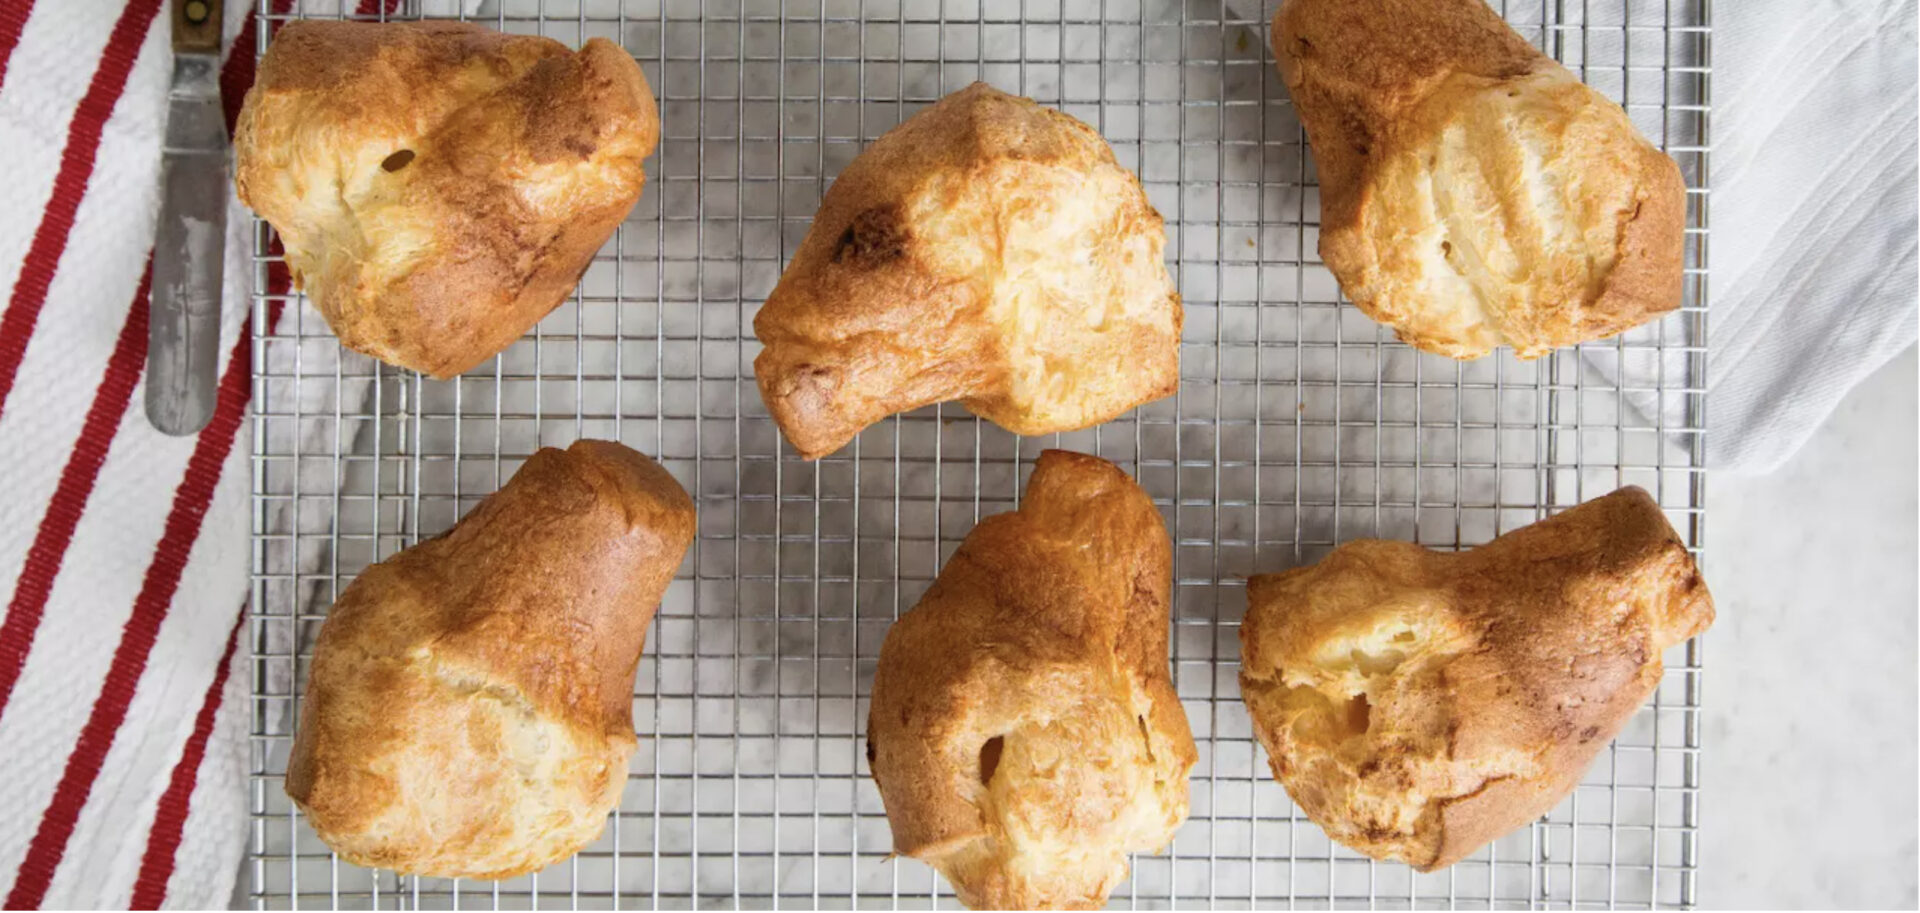 Popovers an option for Sunday baking